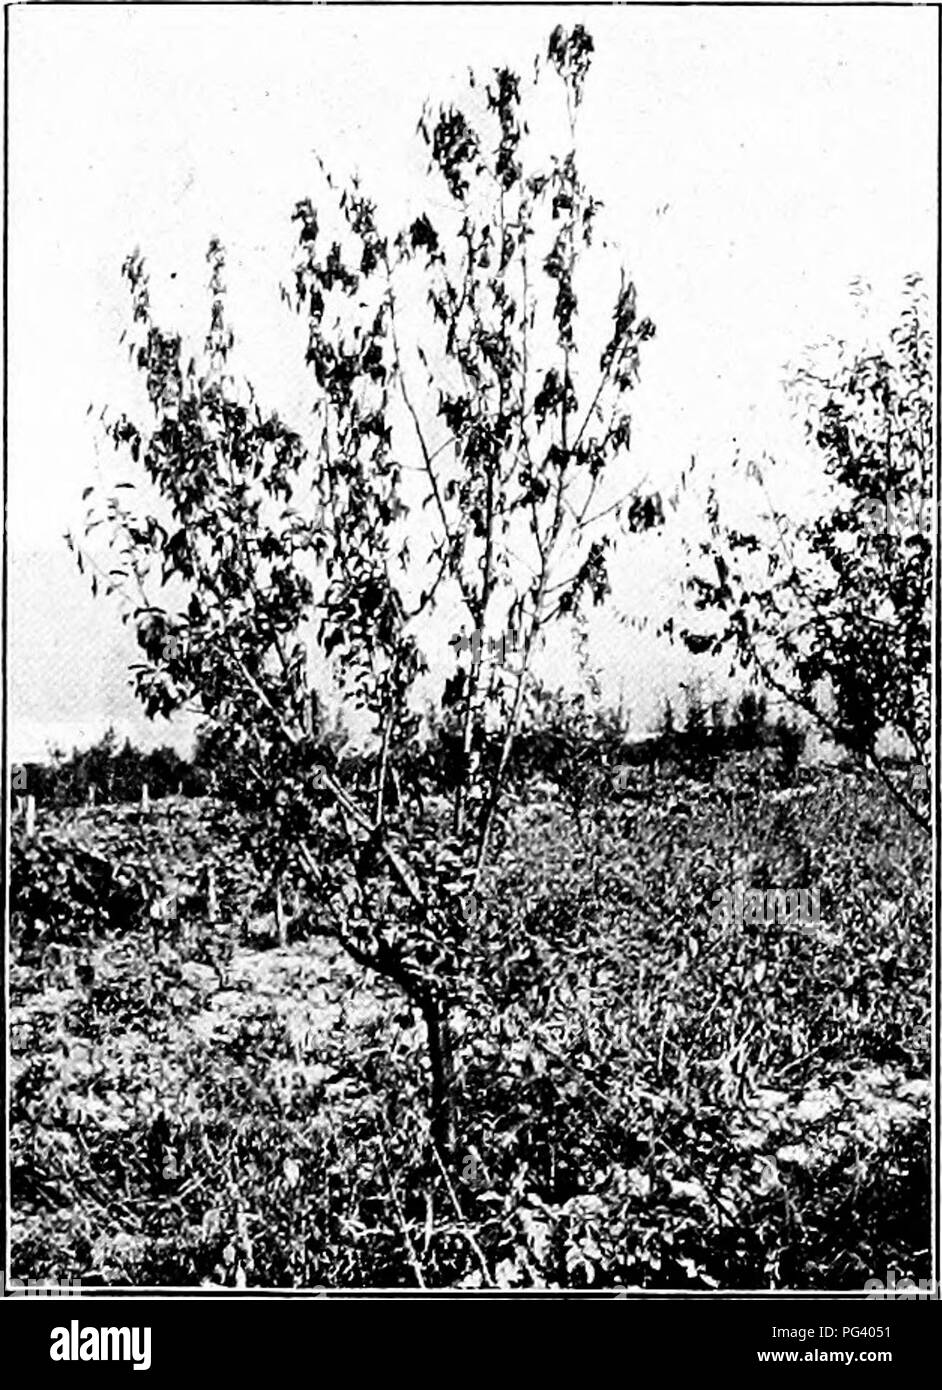 . Fungous diseases of plants : with chapters on physiology, culture methods and technique . Fungi in agriculture. 122 FUNGOUS DISEASES OF PLANTS Burrill, T. J. Blight of Pear and Apple Trees. 111. Indus. Univ. Rept. 10 : 583-597- Jones, L. R. Studies upon Plum Blight. Centrbl. f. Bakt. Paras, u. Infek- tionskr. 9 (Abt. II): 835-841. 1902. Waite, M. B. Cause and Prevention of Pear Blight. Year Book U. S. Dept. Agl. (1895): 295-300. Waite, M. B. Pear Blight and its Control in California. State Hort. Com. of Calif. (Special Report) (1906): 1-20. Whetzel, H. H. The Blight Canker of Apple Trees. Co Stock Photo